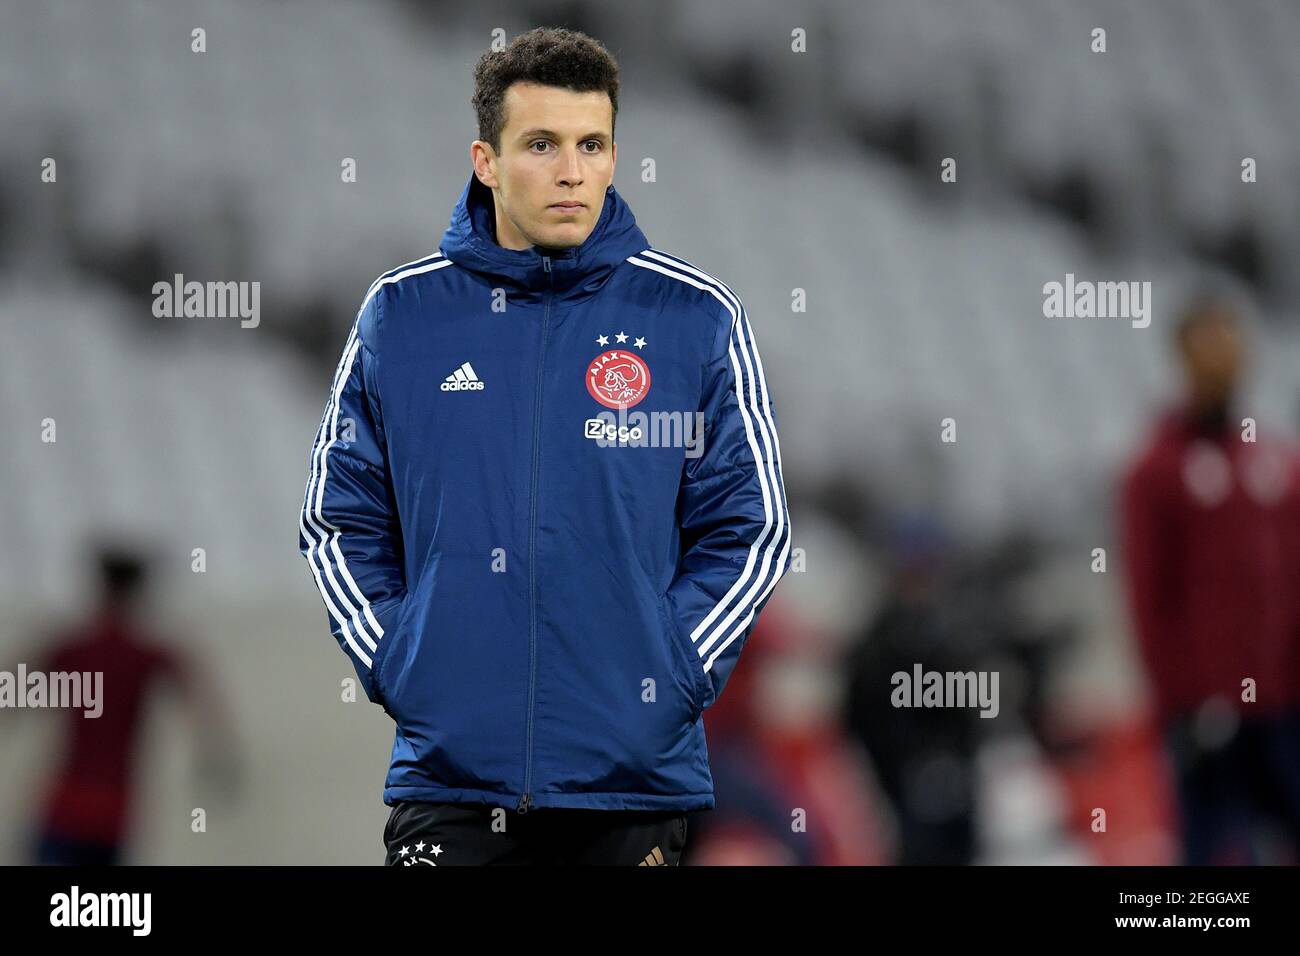 LILLE, FRANCE - FEBRUARY 18: Oussama Idrissi of Ajax during the UEFA Europa League match between Lille OSC and Ajax at Stade Pierre Mauroy on February Stock Photo